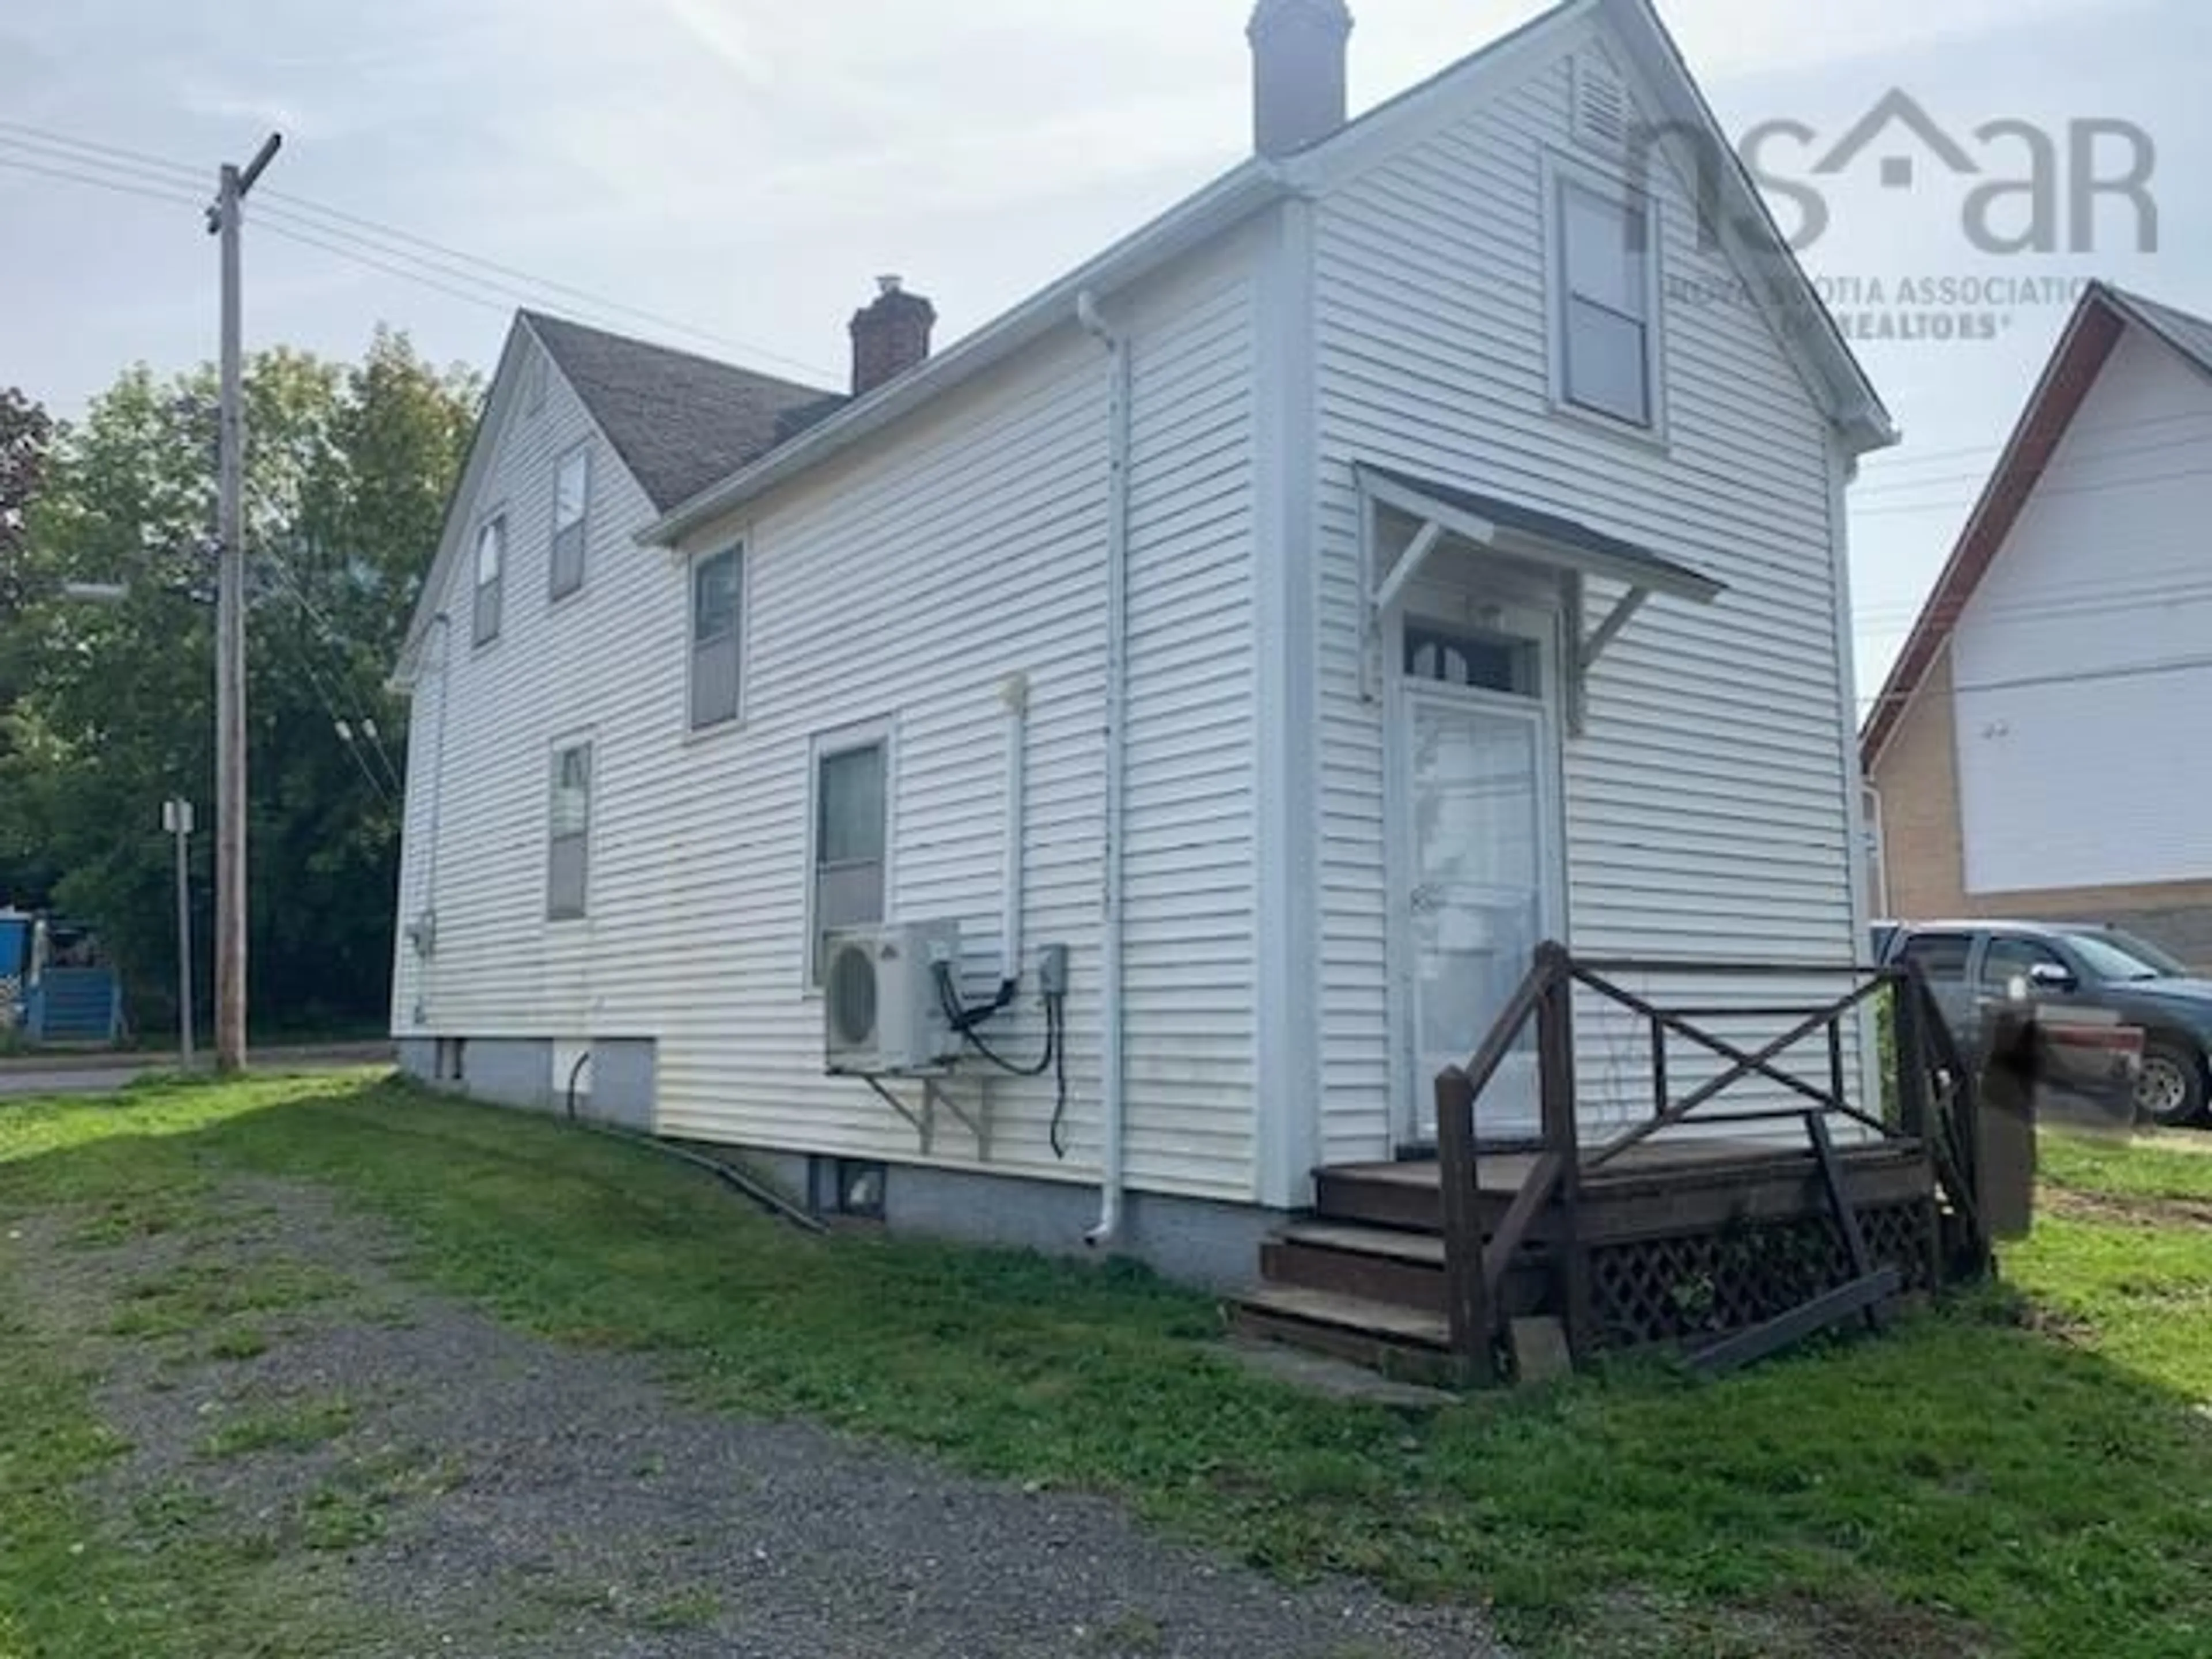 Home with unknown exterior material for 271 James St, New Glasgow Nova Scotia B2H 2Y9